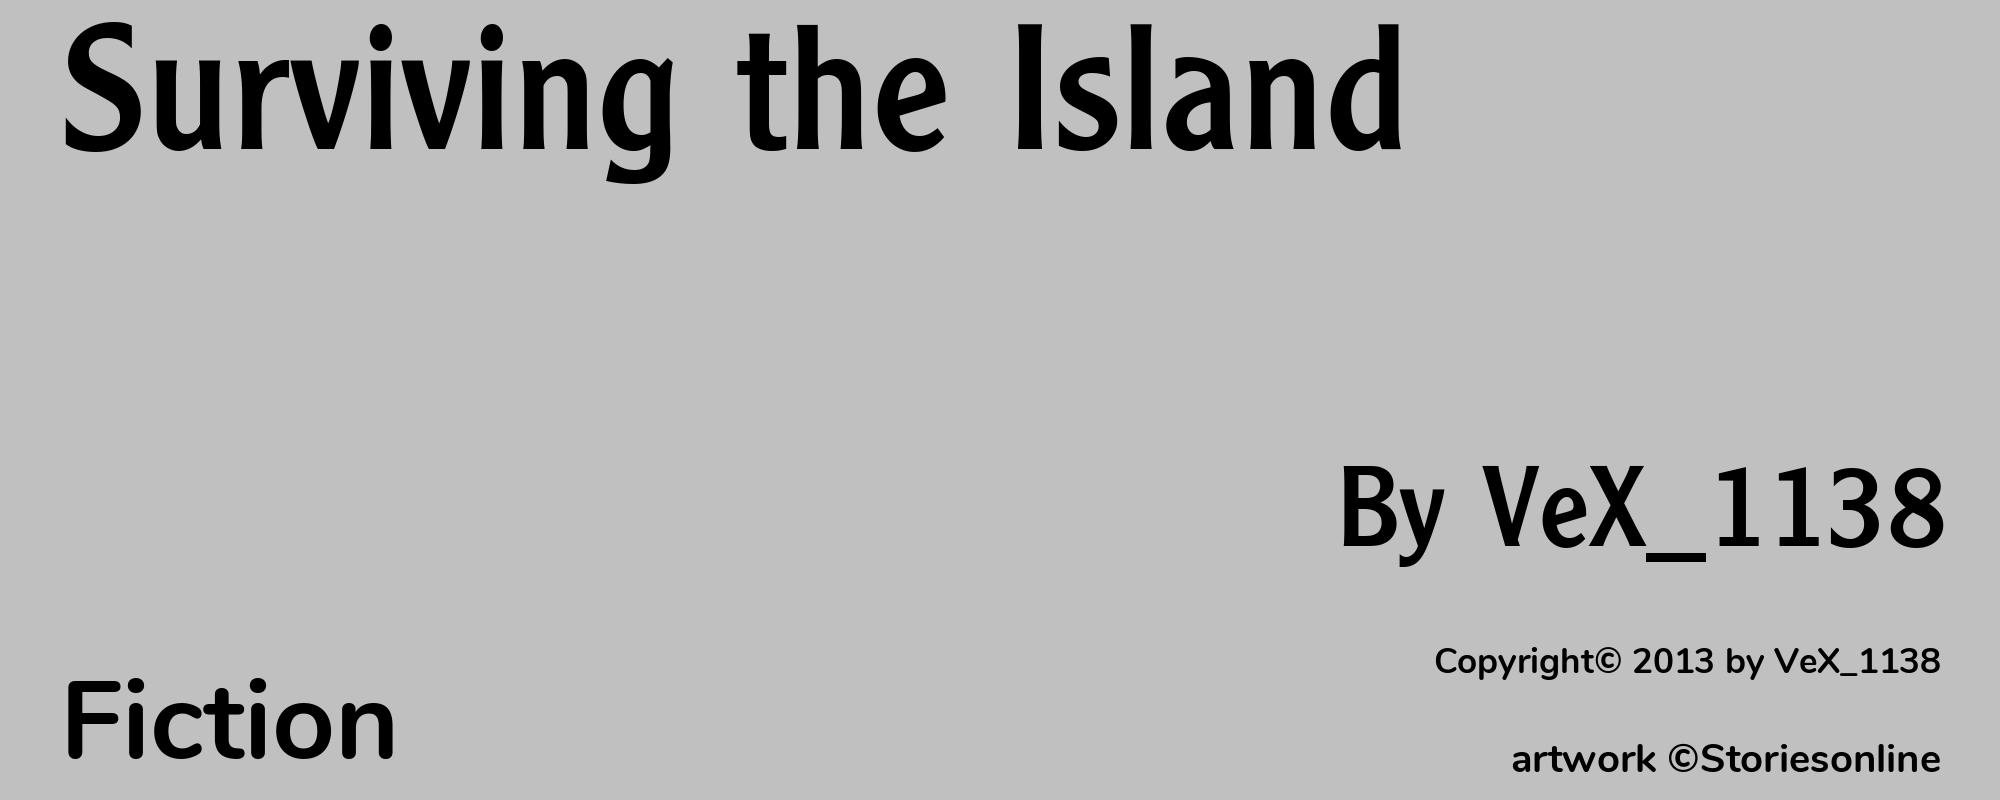 Surviving the Island - Cover